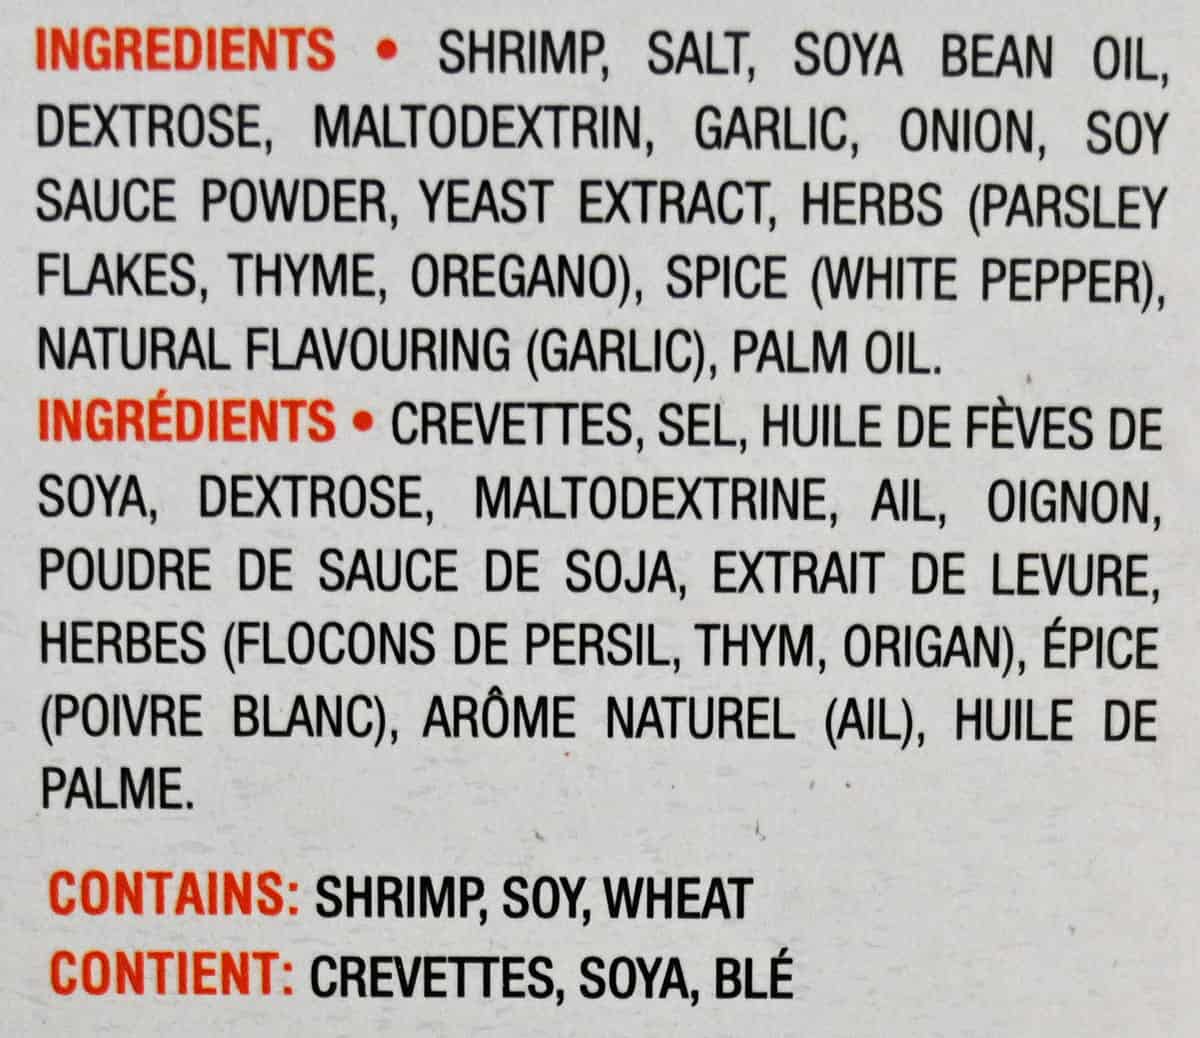 Image of the ingredients list from the back of the box.